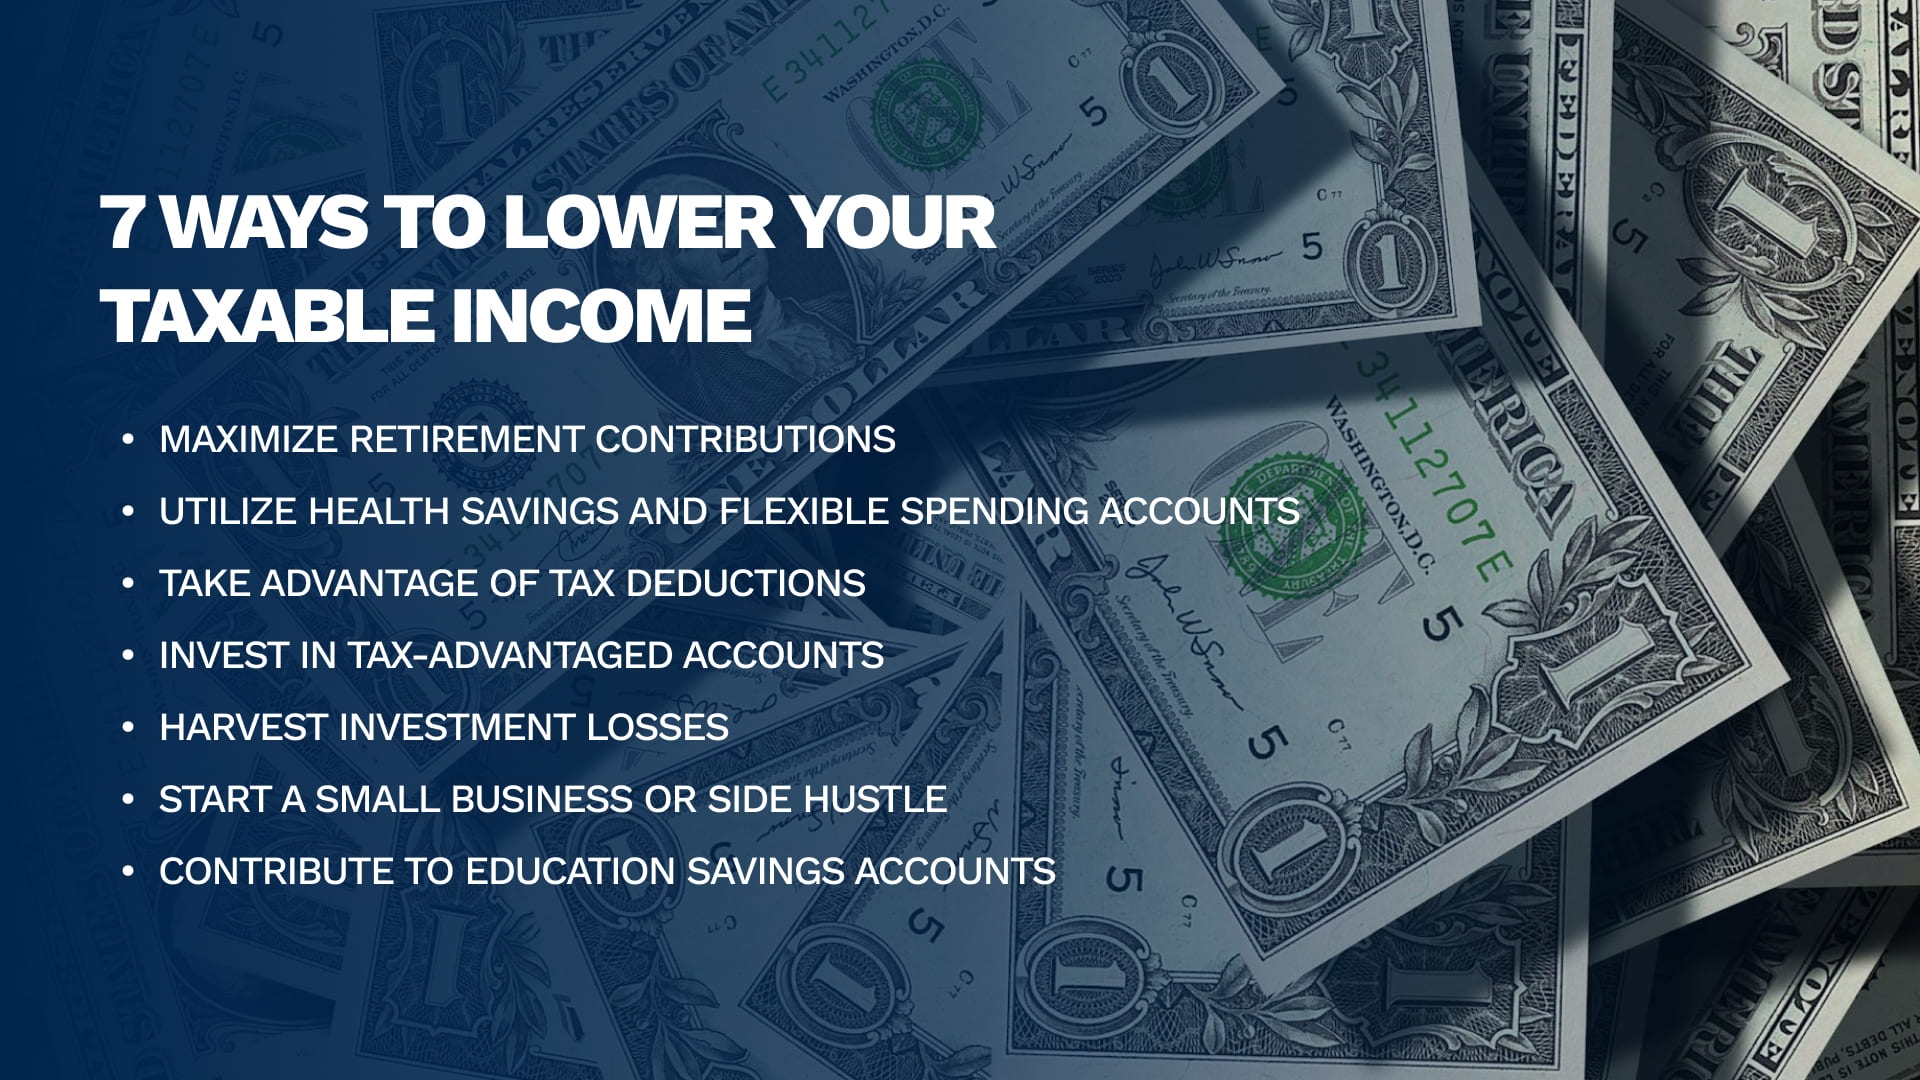 7 Ways to Lower Your Taxable Income